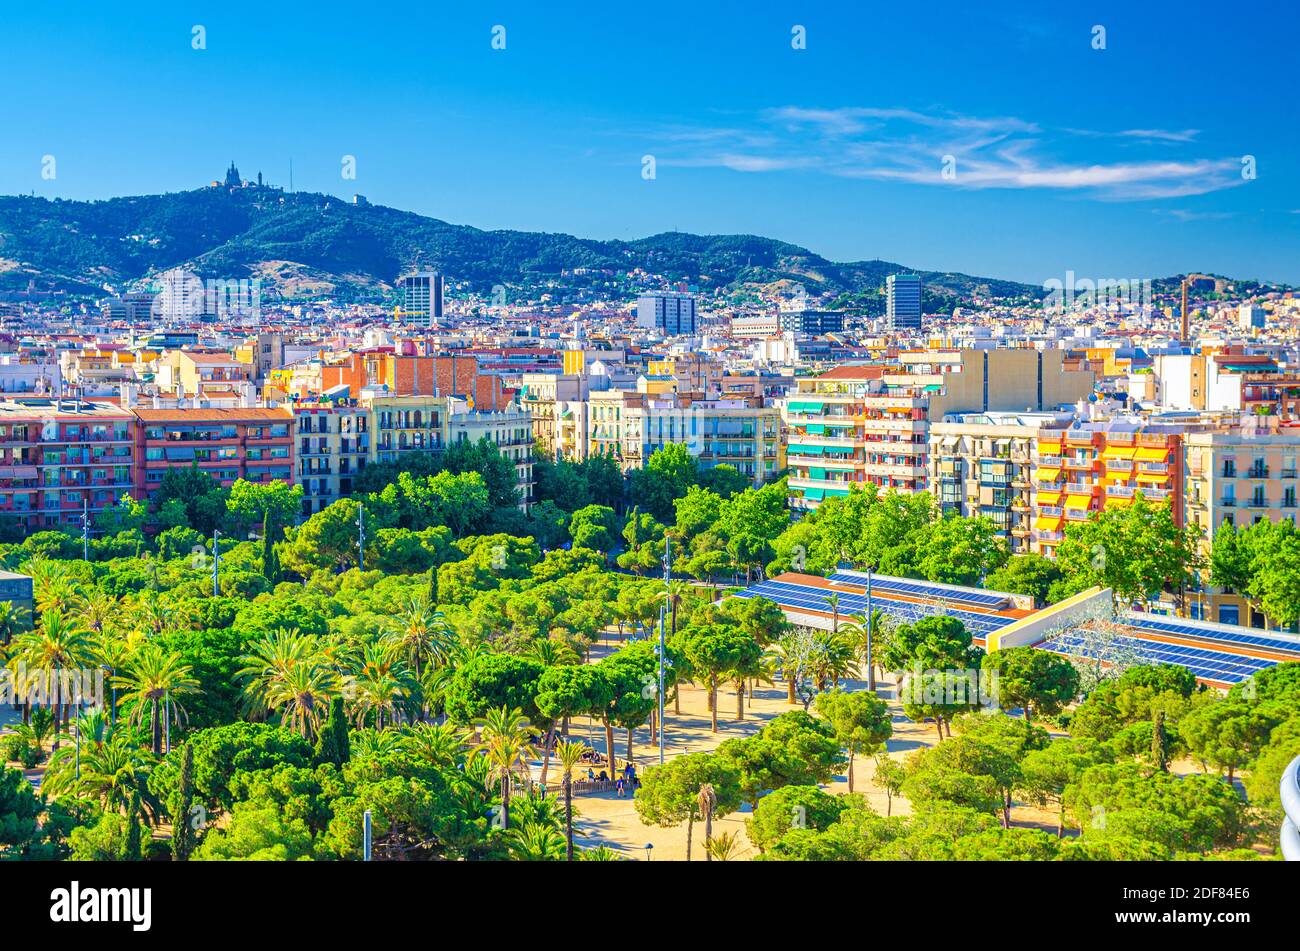 Aerial view of Barcelona city historical quarters districts with palm trees park, residential buildings, Tibidabo hill of Serra de Collserola mountain Stock Photo